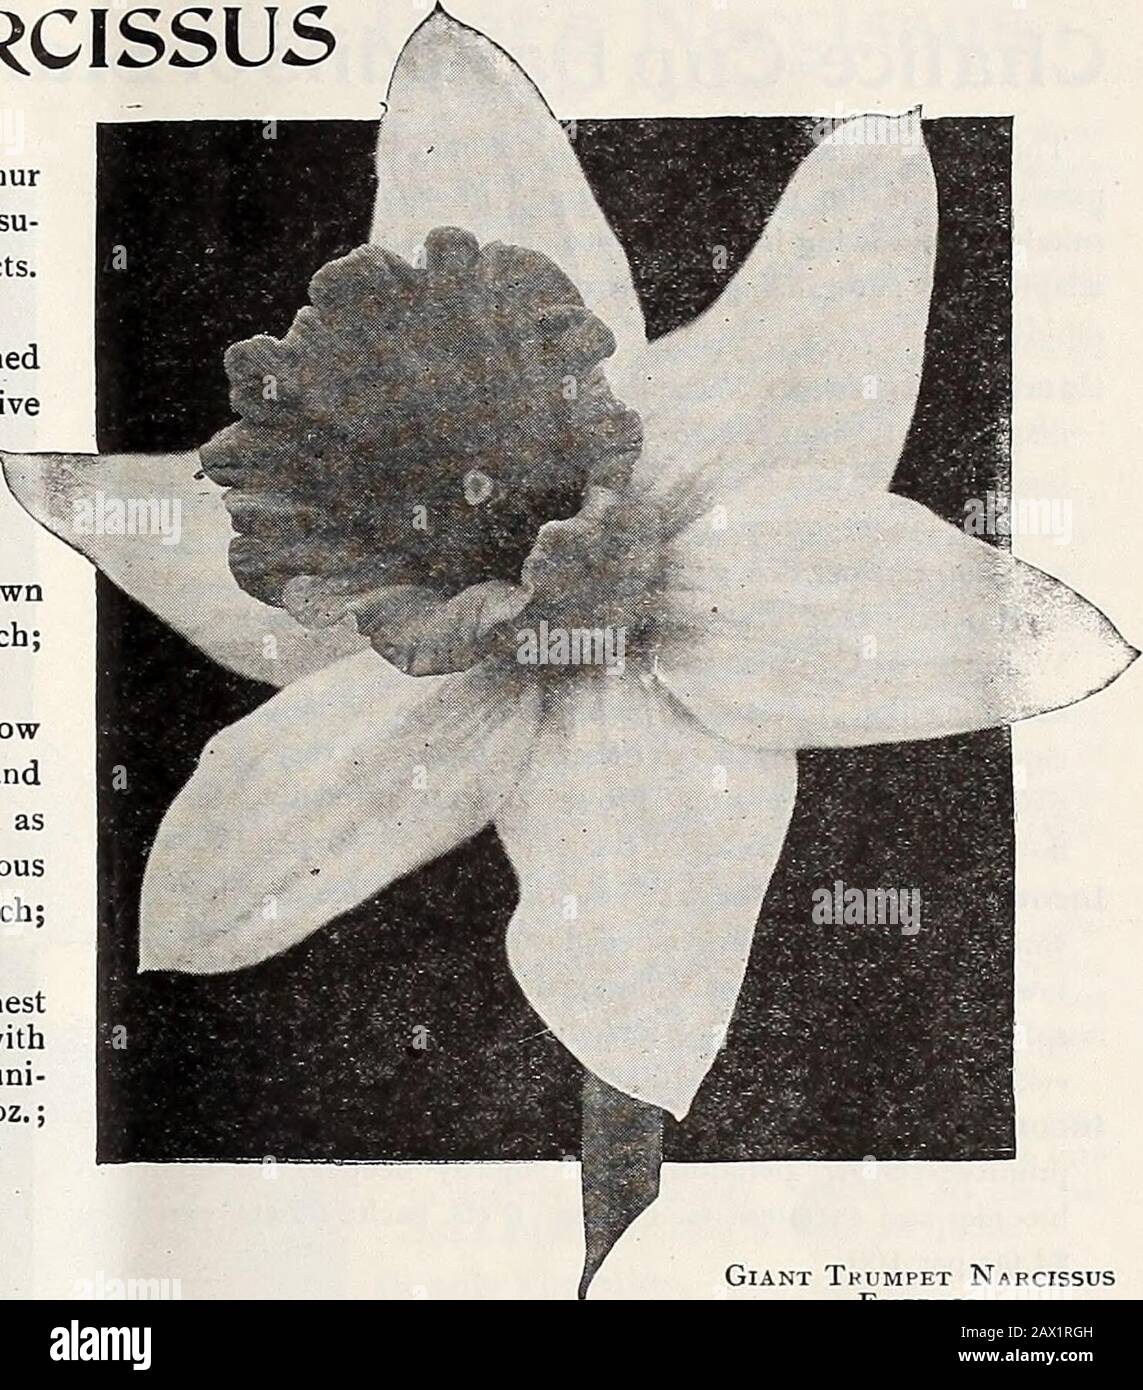 Dreer's autumn catalogue 1920 . Giant Trumpet Narcissus, Olympia Giant Tkumpet NarcissusEmpress Mme de Graaff. A magnificent flower; the perianth issnow white, the large trumpet is slightly tinted with prim-rose, which changes to white, has been well named TheQueen of Daffodils. 12 cts. each; $1.25 per doz.;50 per 100.Olympia. This remarkably fine Daffodil might briefly bedescribed as a greatly improved Emperor,being much larger in size and of a richer,deeper color. It is a wonderfully stronggrower, with fine broad blue-green foliage,and its bold majestic yet artistic flowers areproduced very Stock Photo